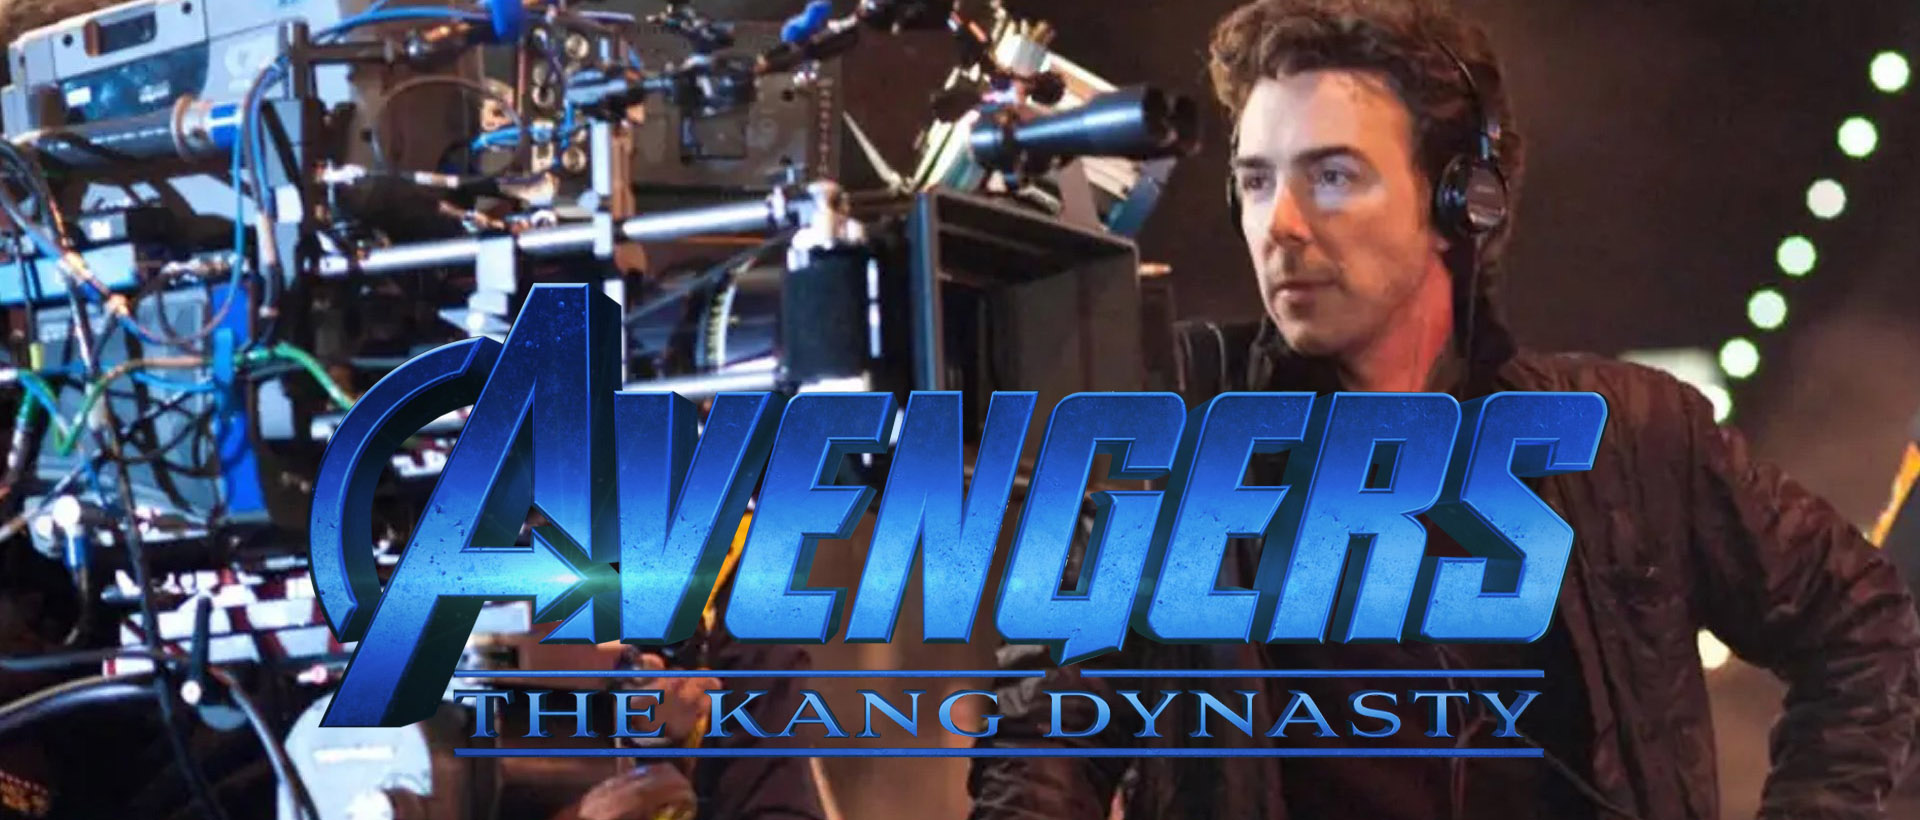 shawn levy avengers the kang dynasty banner